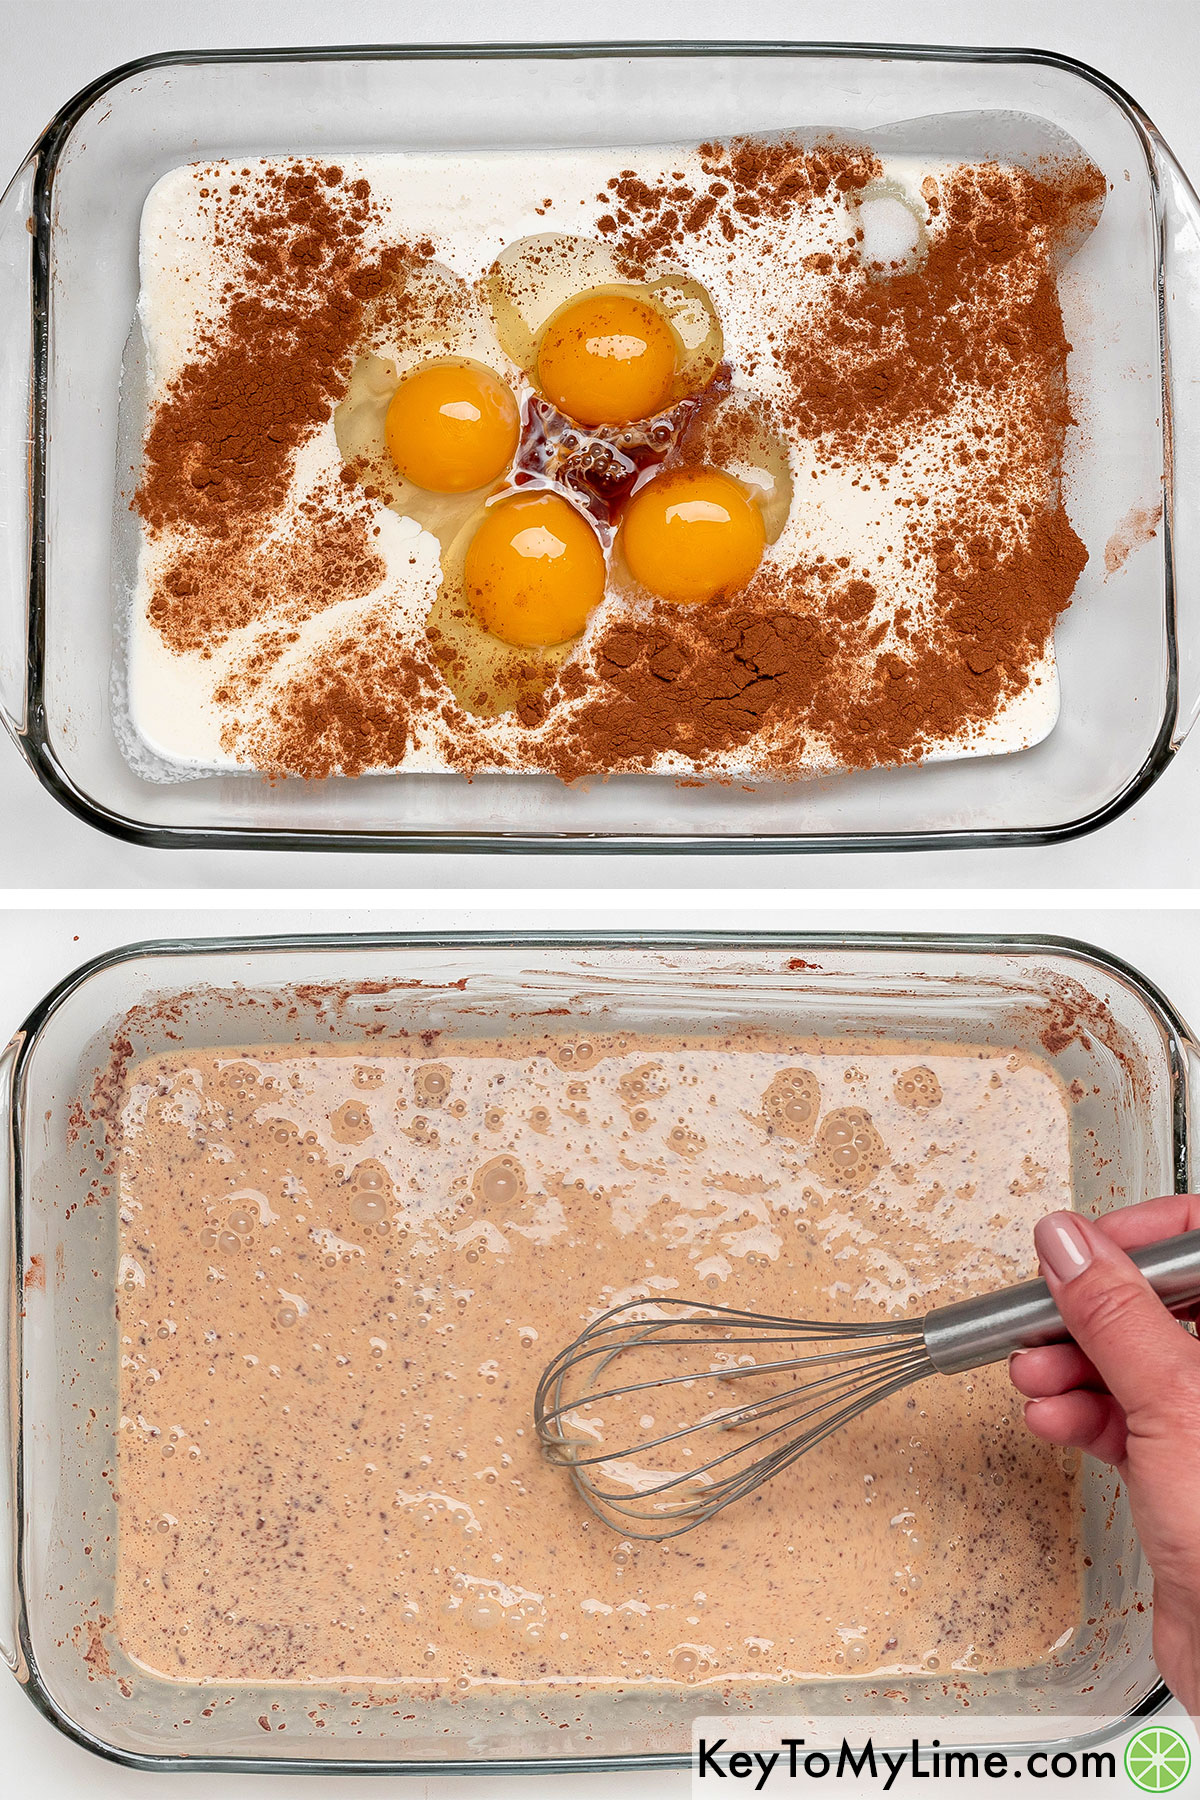 Adding eggs, heavy cream, vanilla extract, and cinnamon to a large casserole dish, and then whisking to combine.